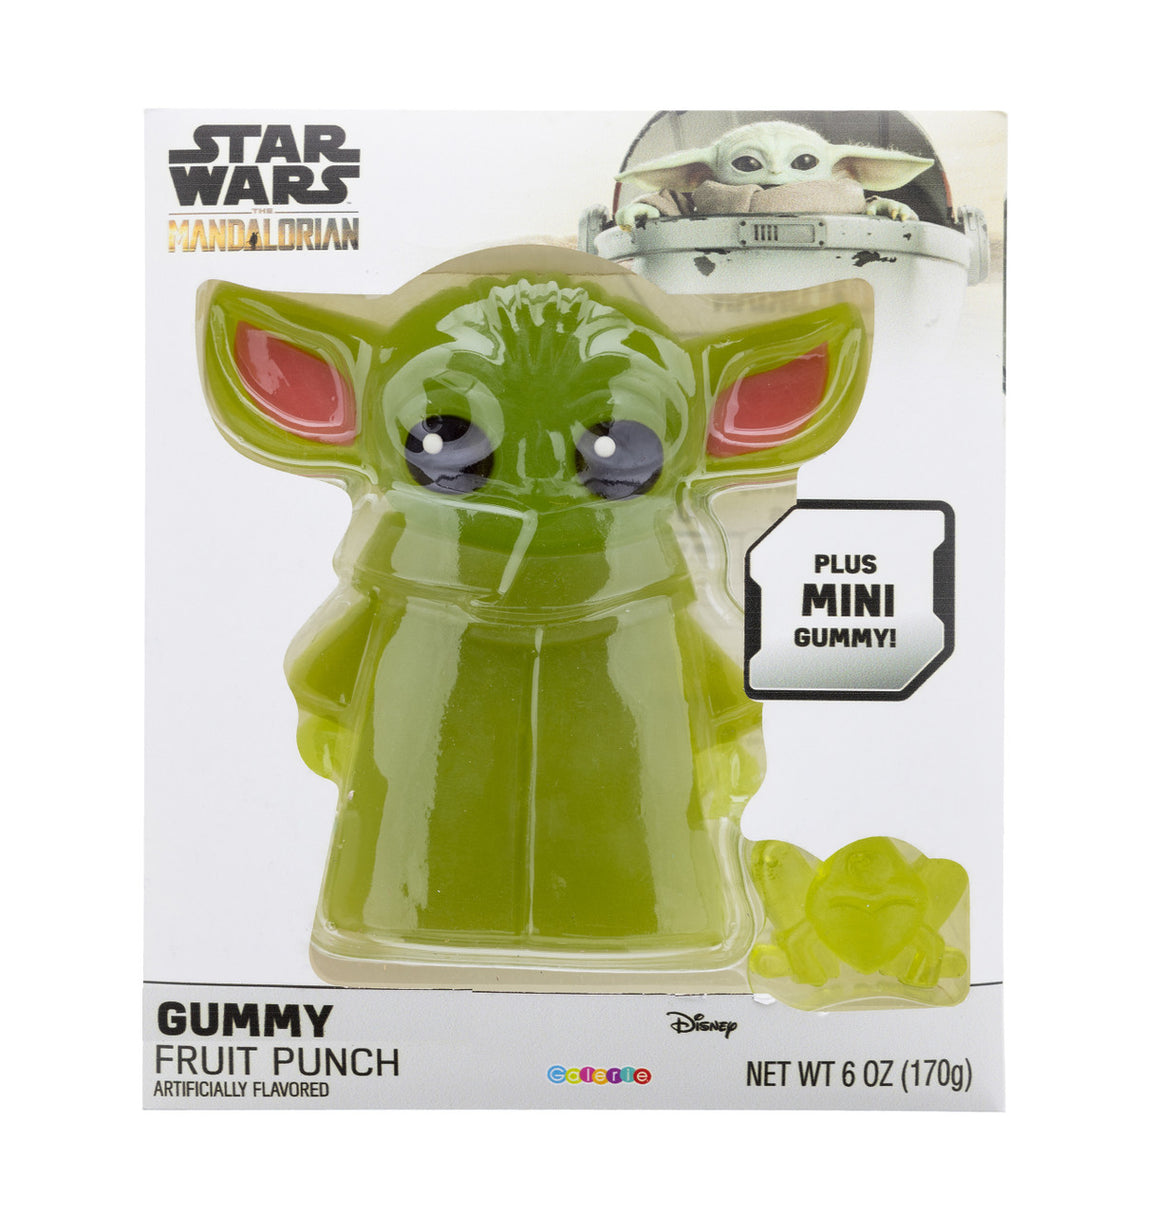 All City Candy Star Wars the Mandalorian "Grogu" Jumbo Gummy 6 oz For fresh candy and great service, visit www.allcitycandy.com